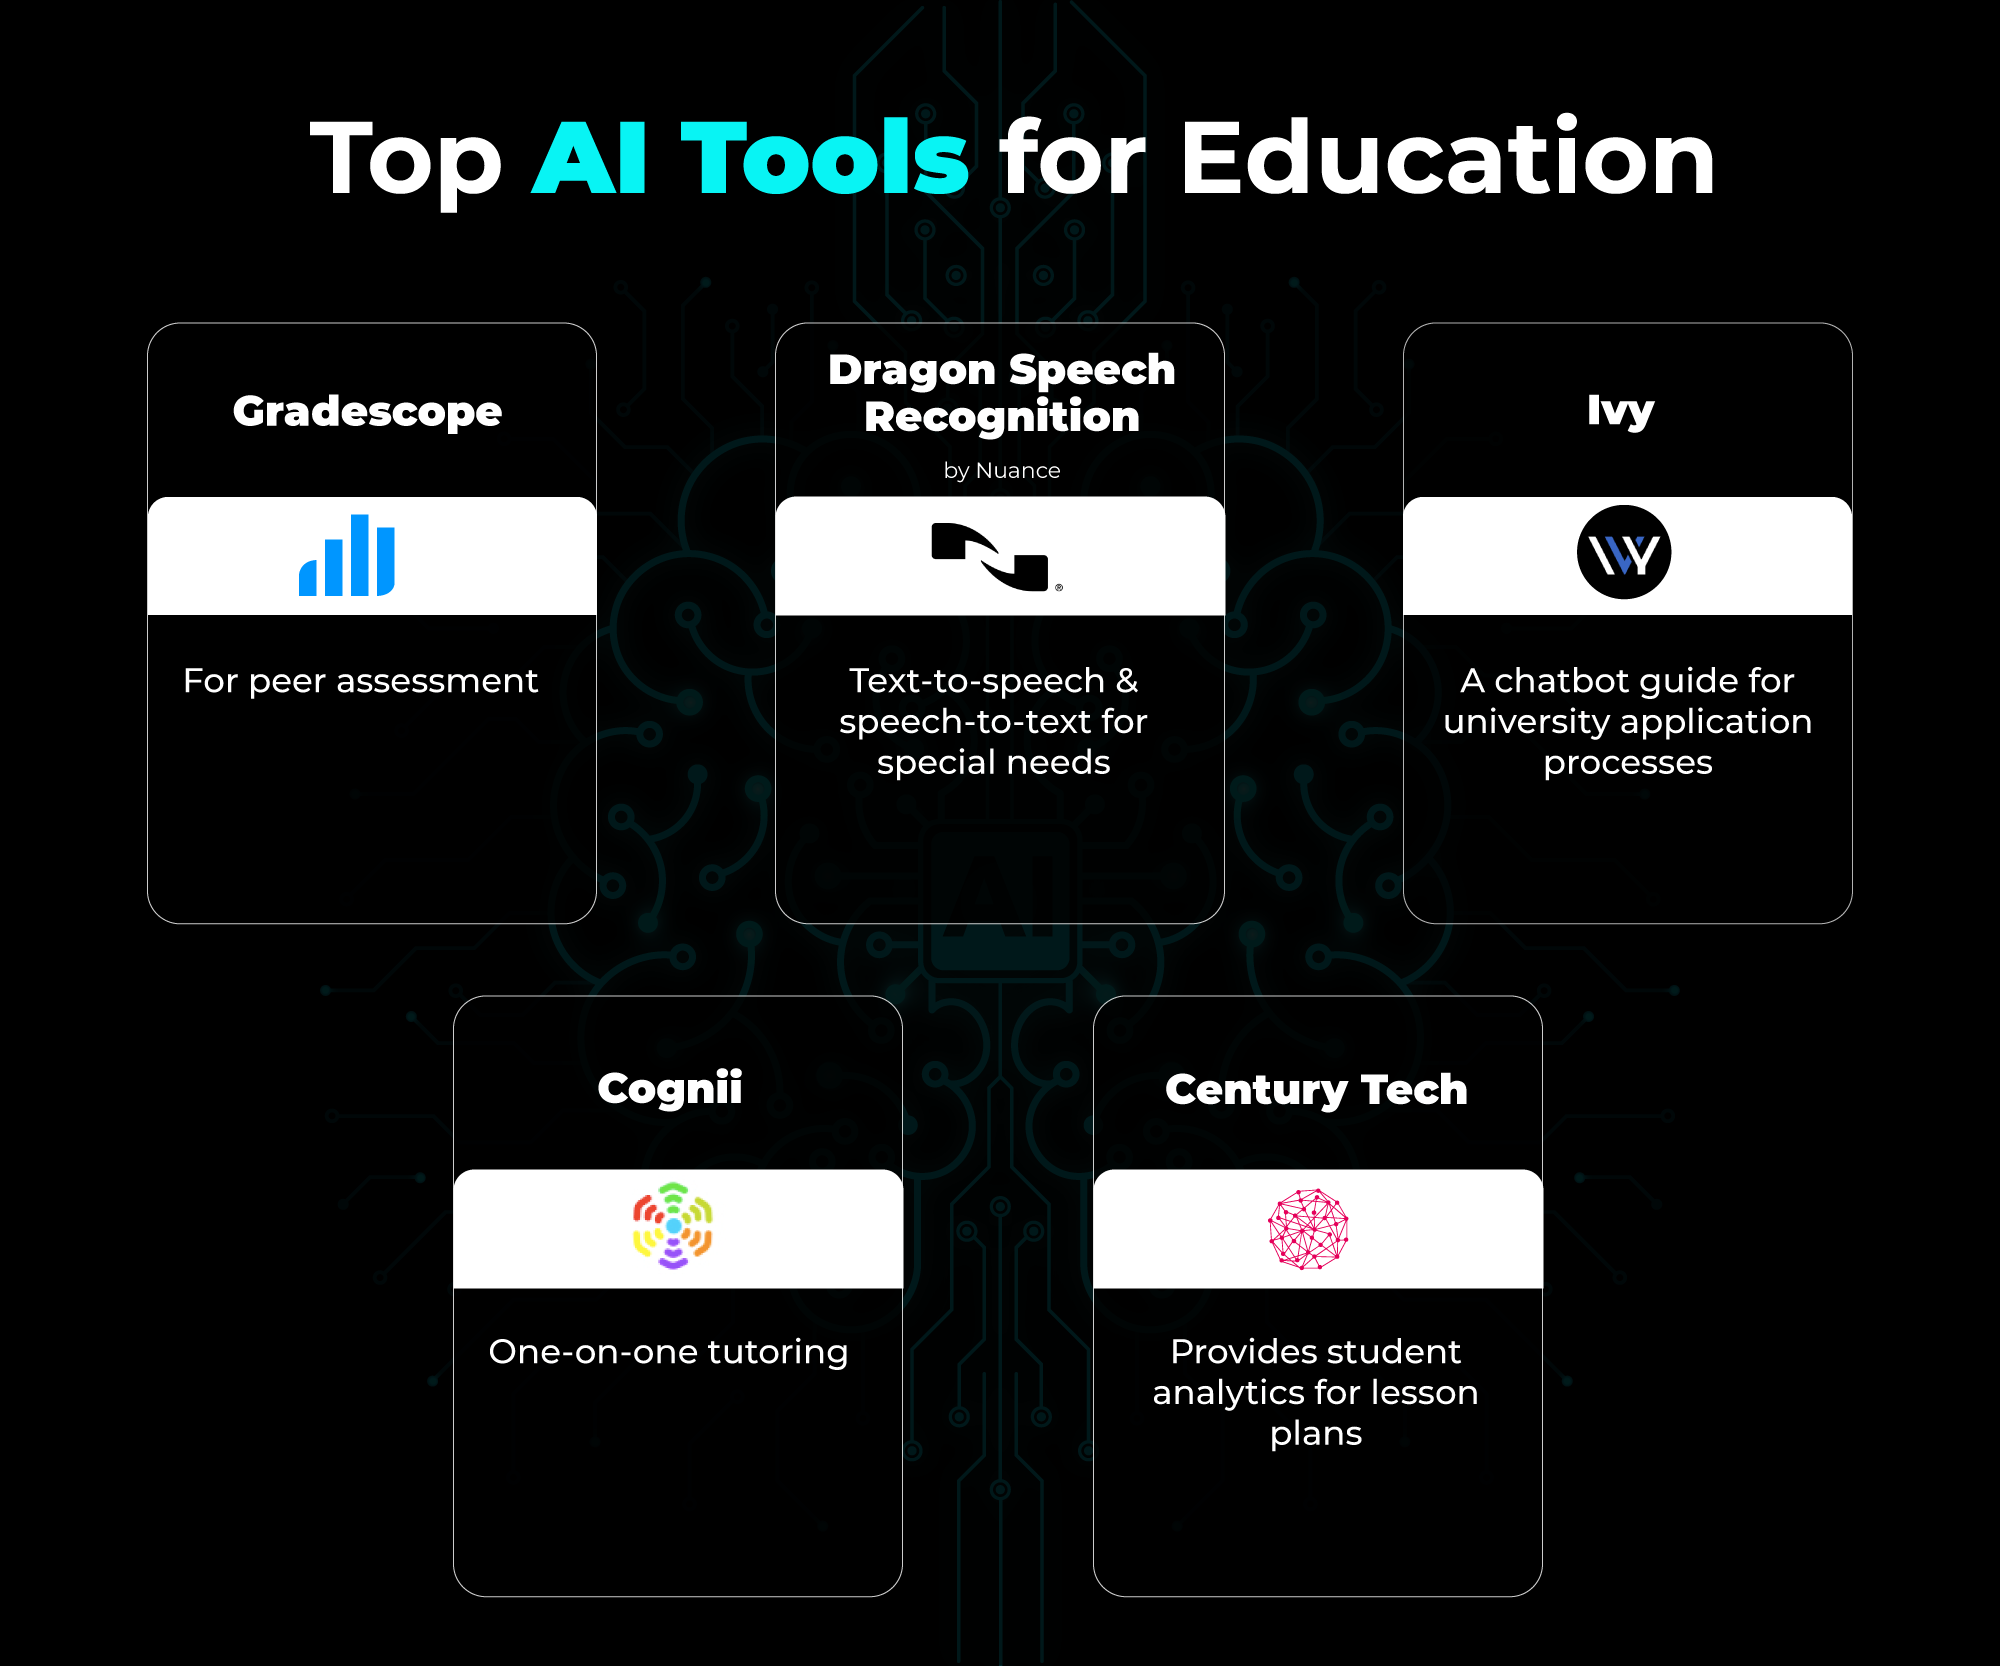 Top AI tools for education